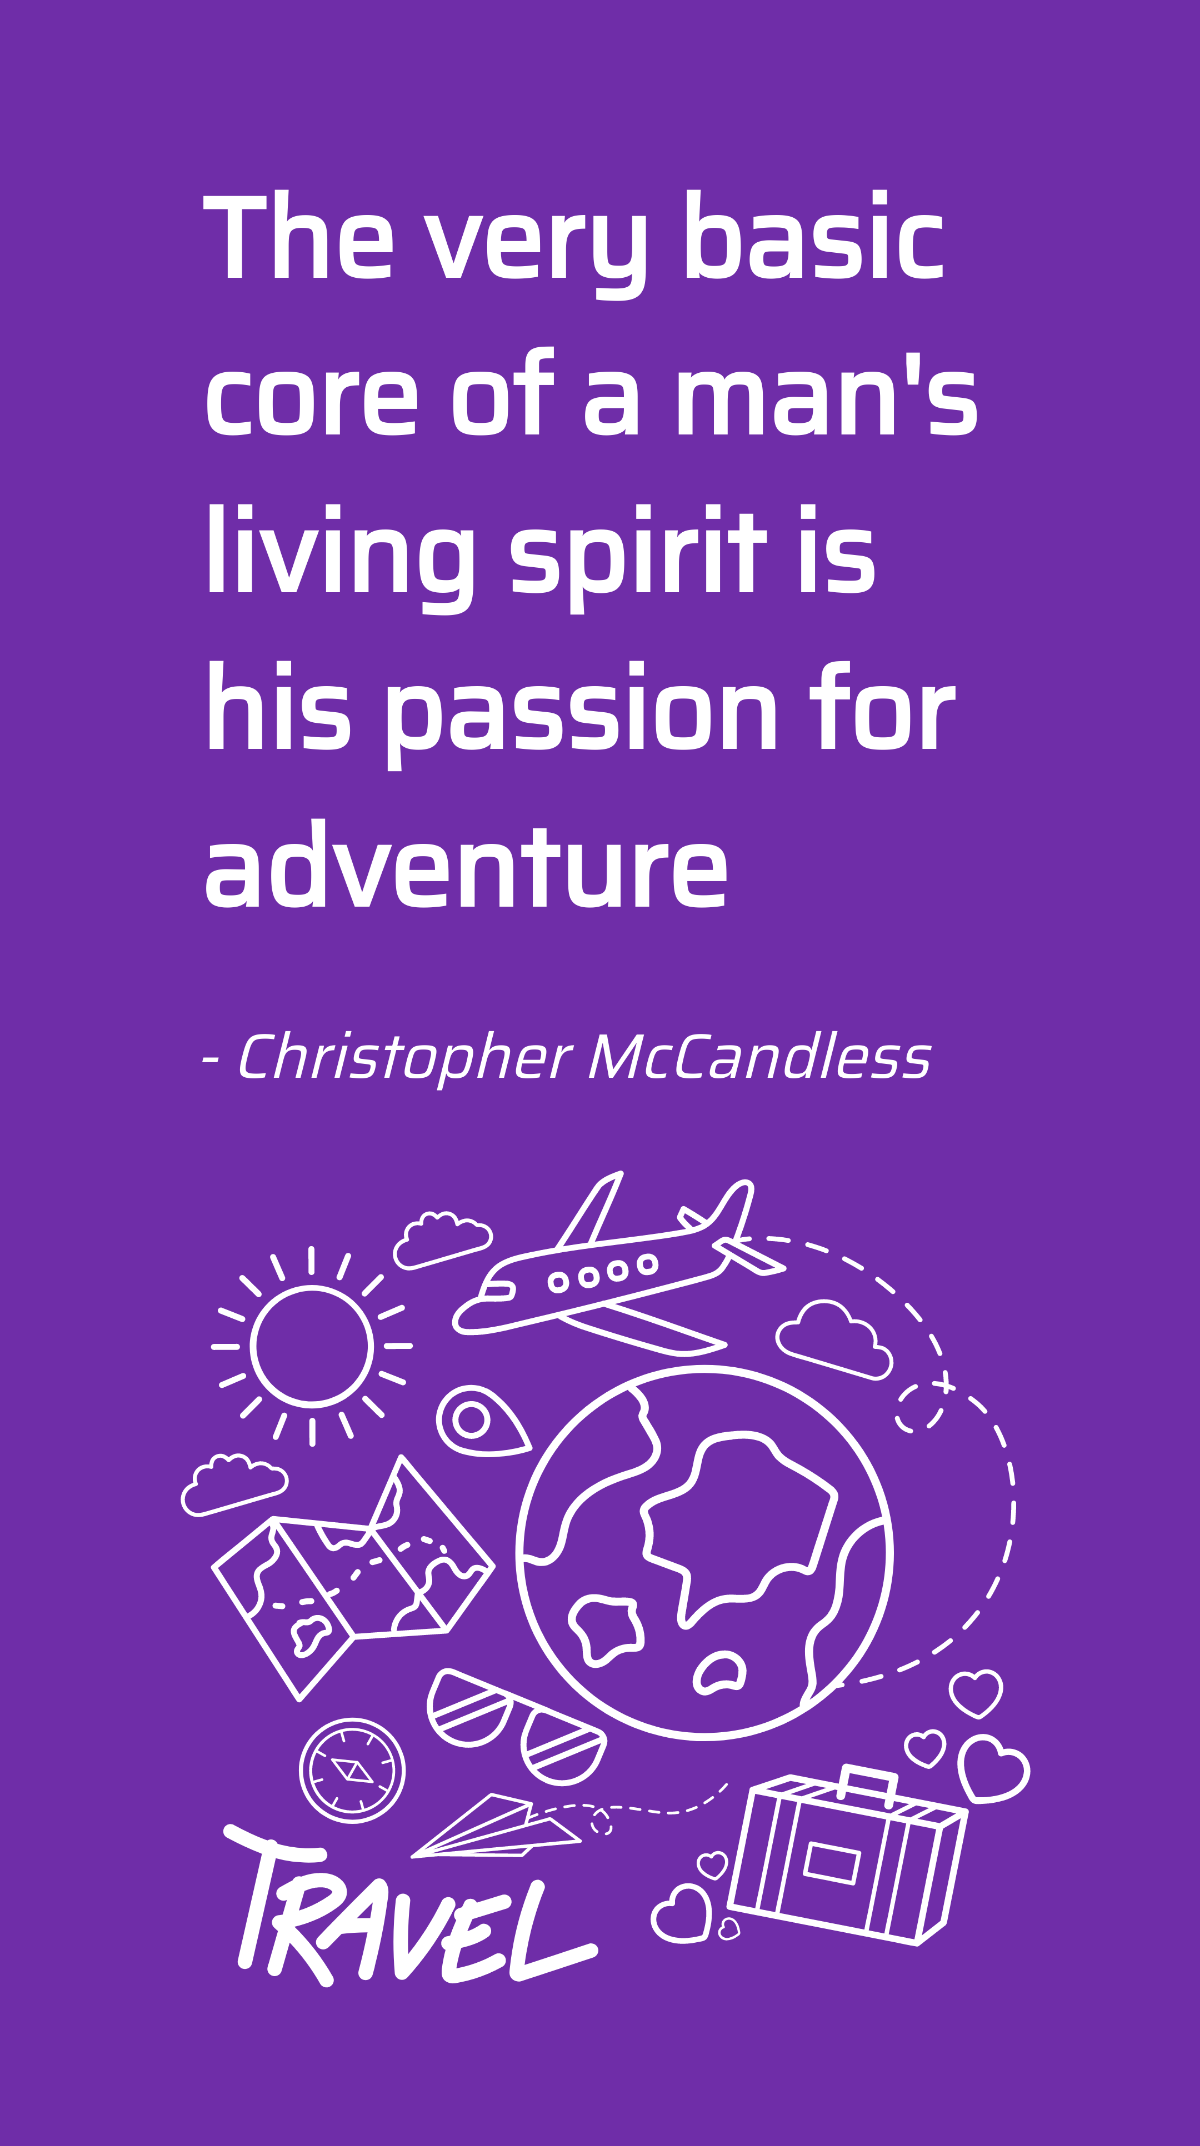 Christopher McCandless - The very basic core of a man's living spirit is his passion for adventure